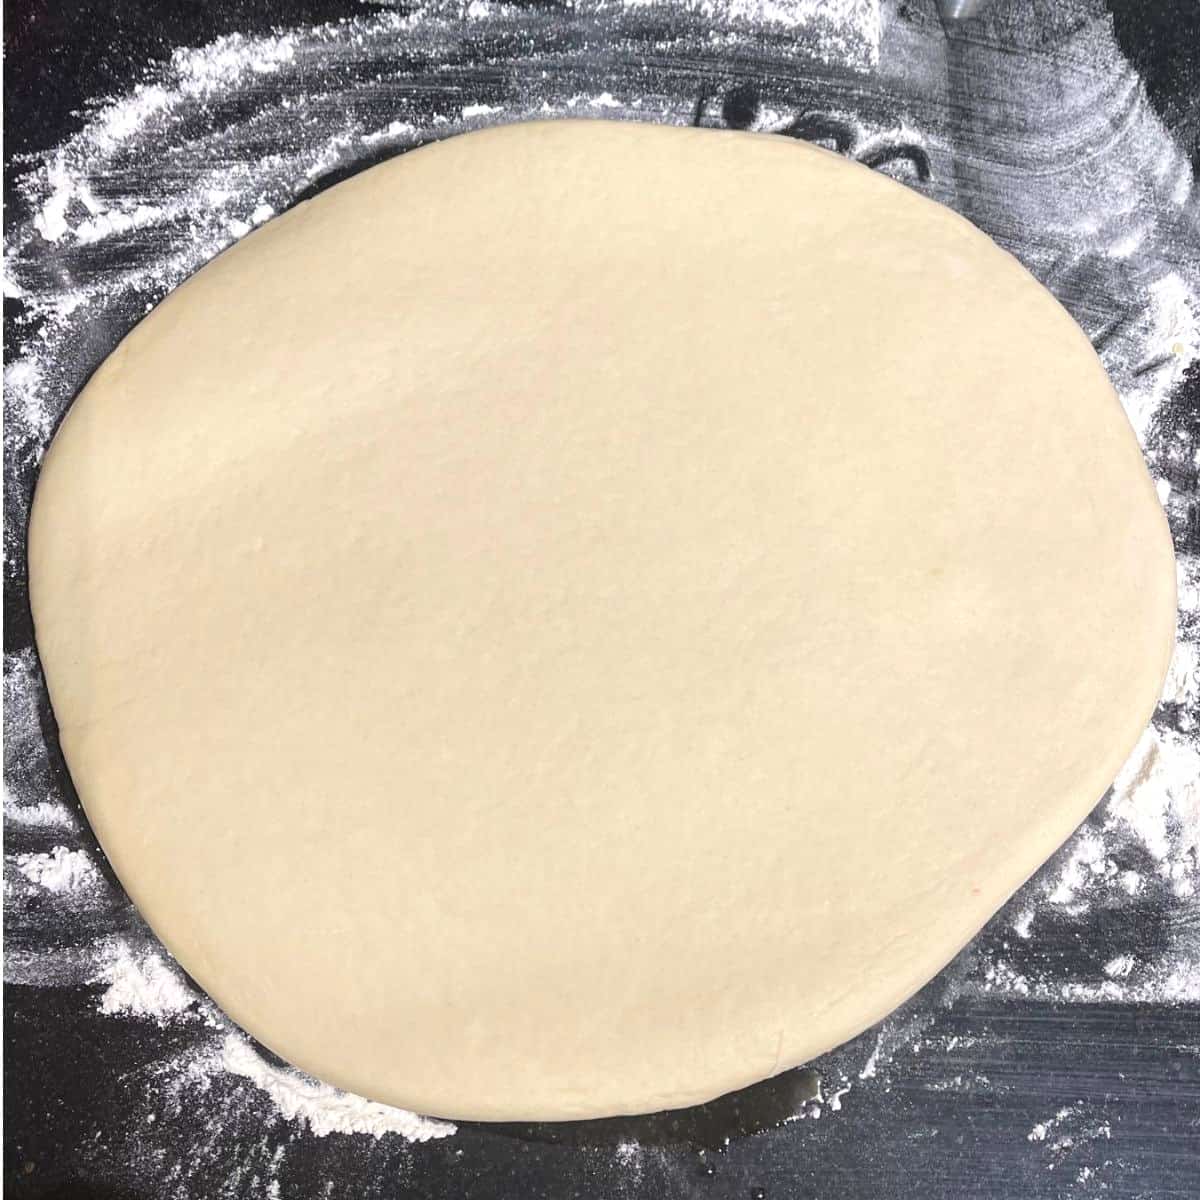 Rolled parker house roll dough on floured surface.